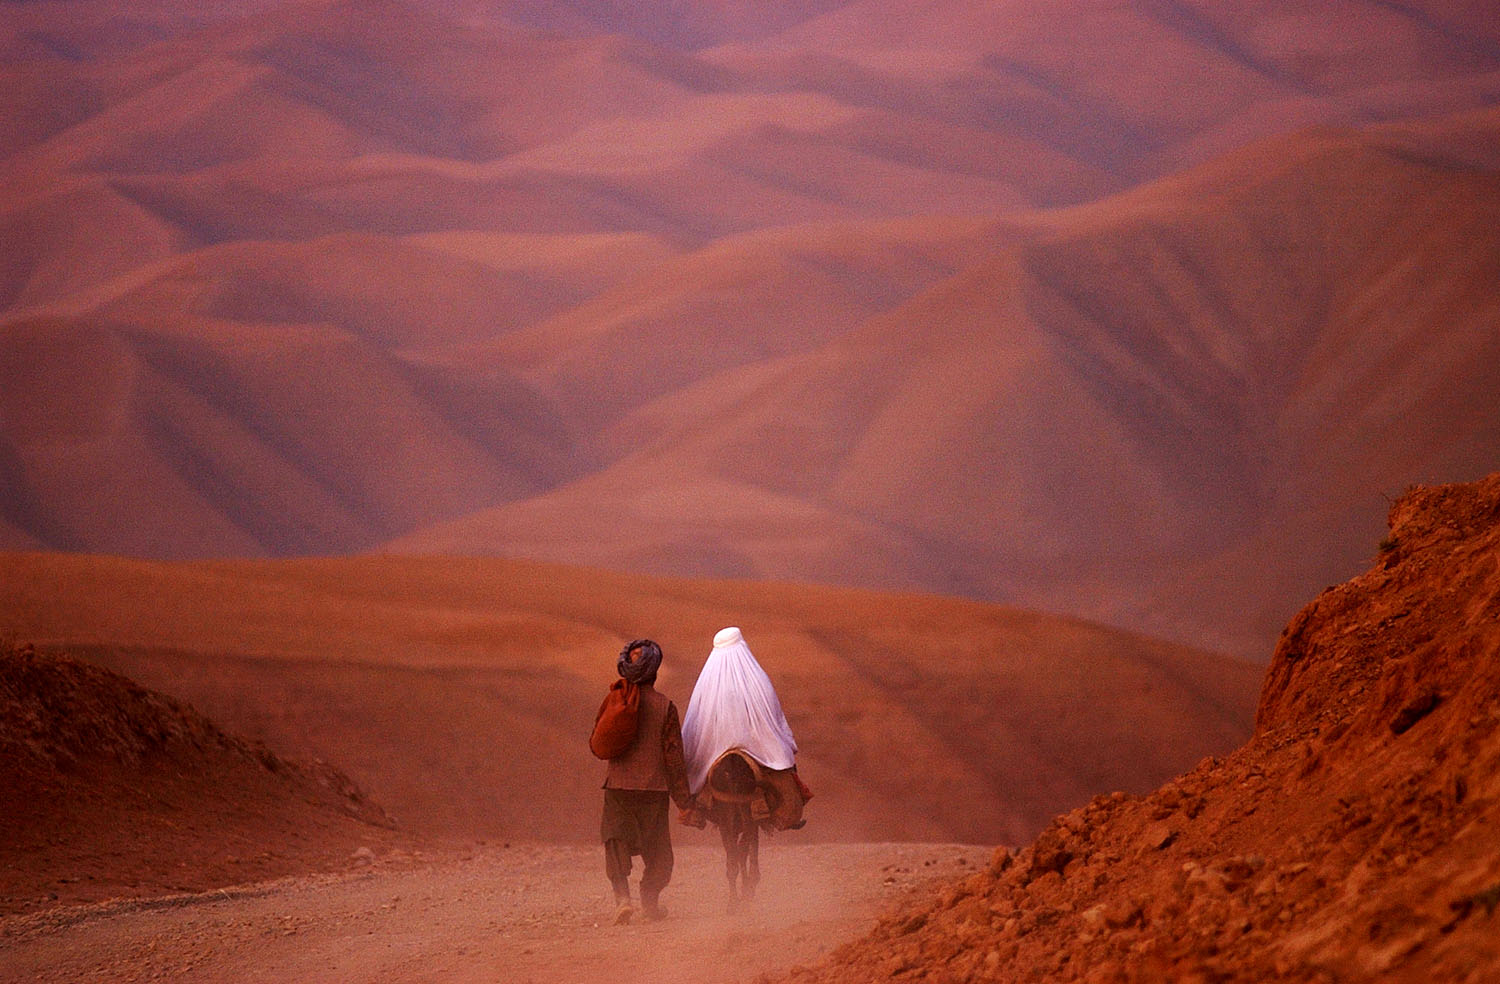 A MAN AND WOMAN WENT THROUGH THE BARREN MOUNTAINS OF BADAKHSHAN PROVNCE IN NORTHERN AFGHANISTAN, ONE OF THOSE MOST DEEPLY AFFECTED BY THE RECENT DROUGHT, ON THEIR WAY TO THE TOWN OF KEMISH IN THE AREA CONTROLLED BY THE NORTHERN ALLIANCE.  PHOTO BY JAMES HILL/19 OCTOBER 2001.